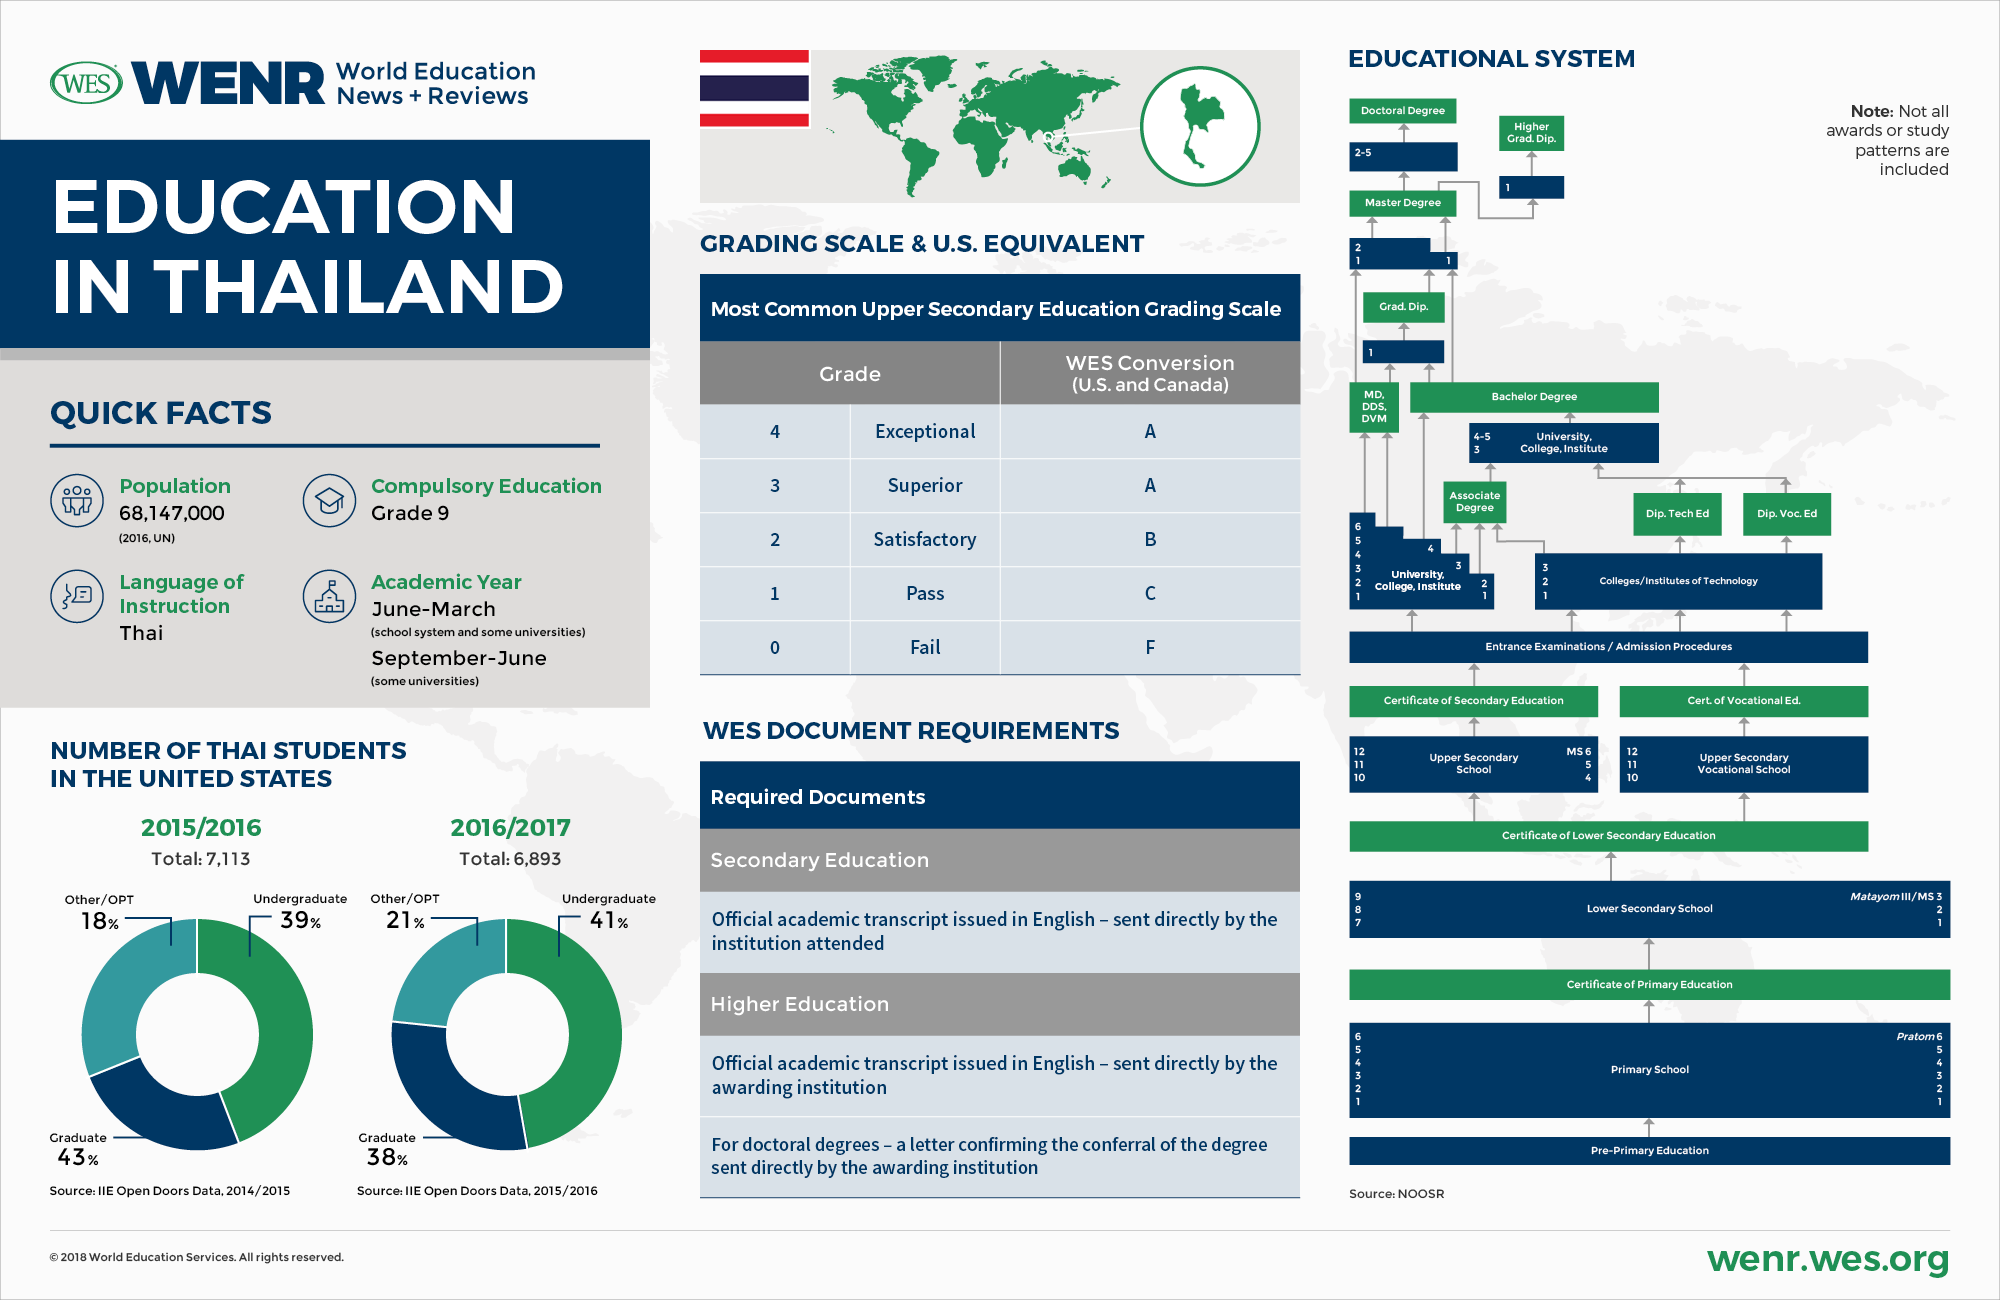 An infographic with fast facts on Thailand's educational system and international student mobility landscape. 